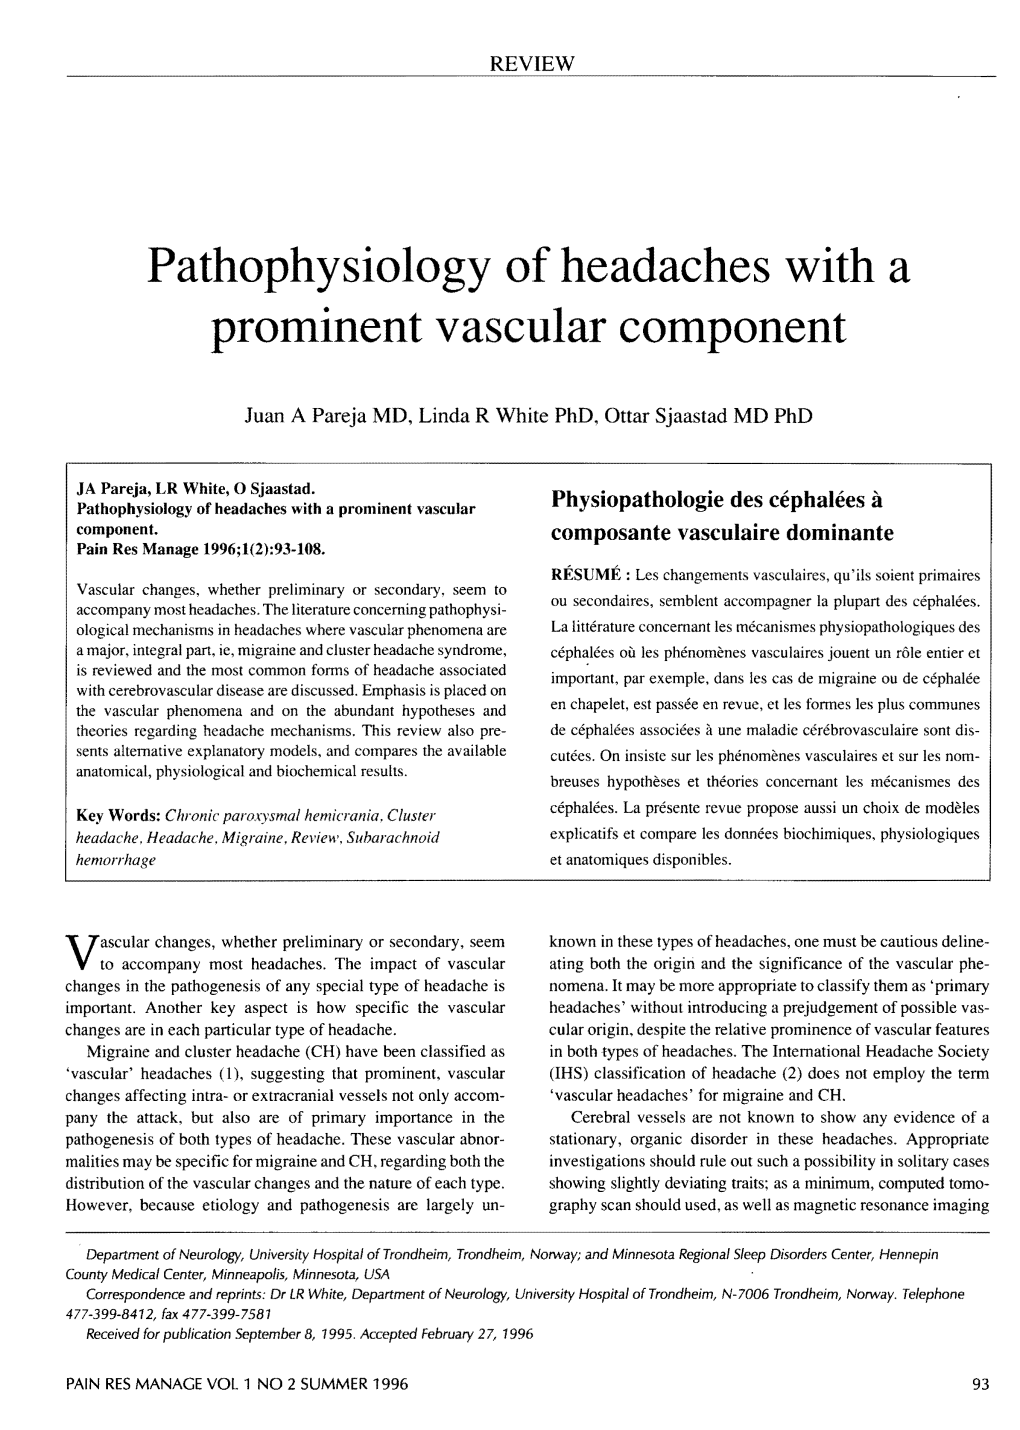 Pathophysiology of Headaches with a Prominent Vascular Component